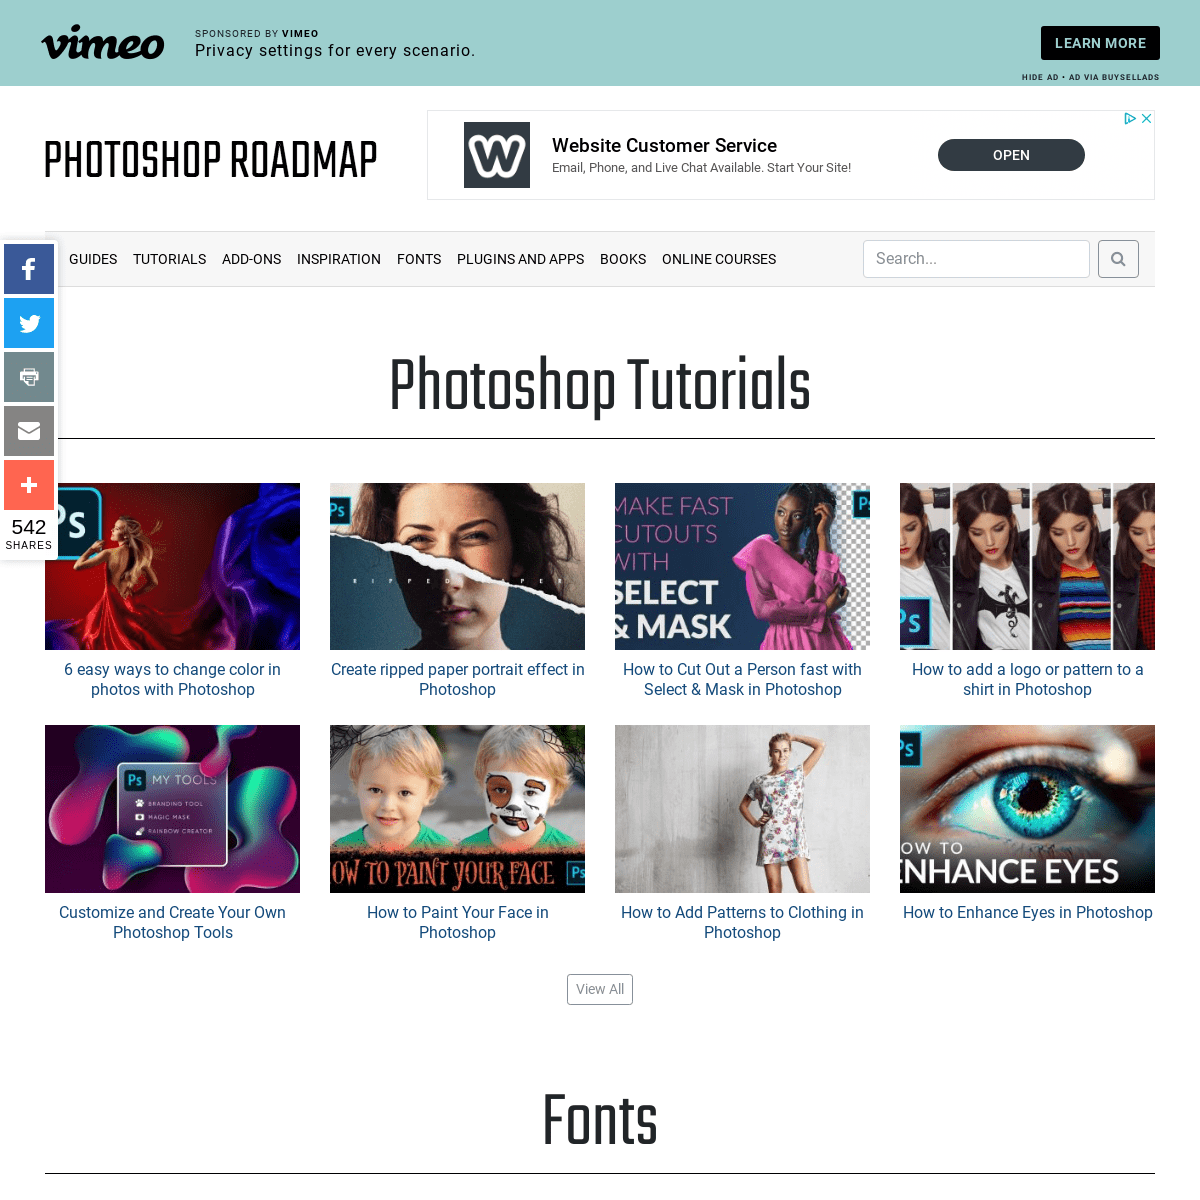 A complete backup of photoshoproadmap.com